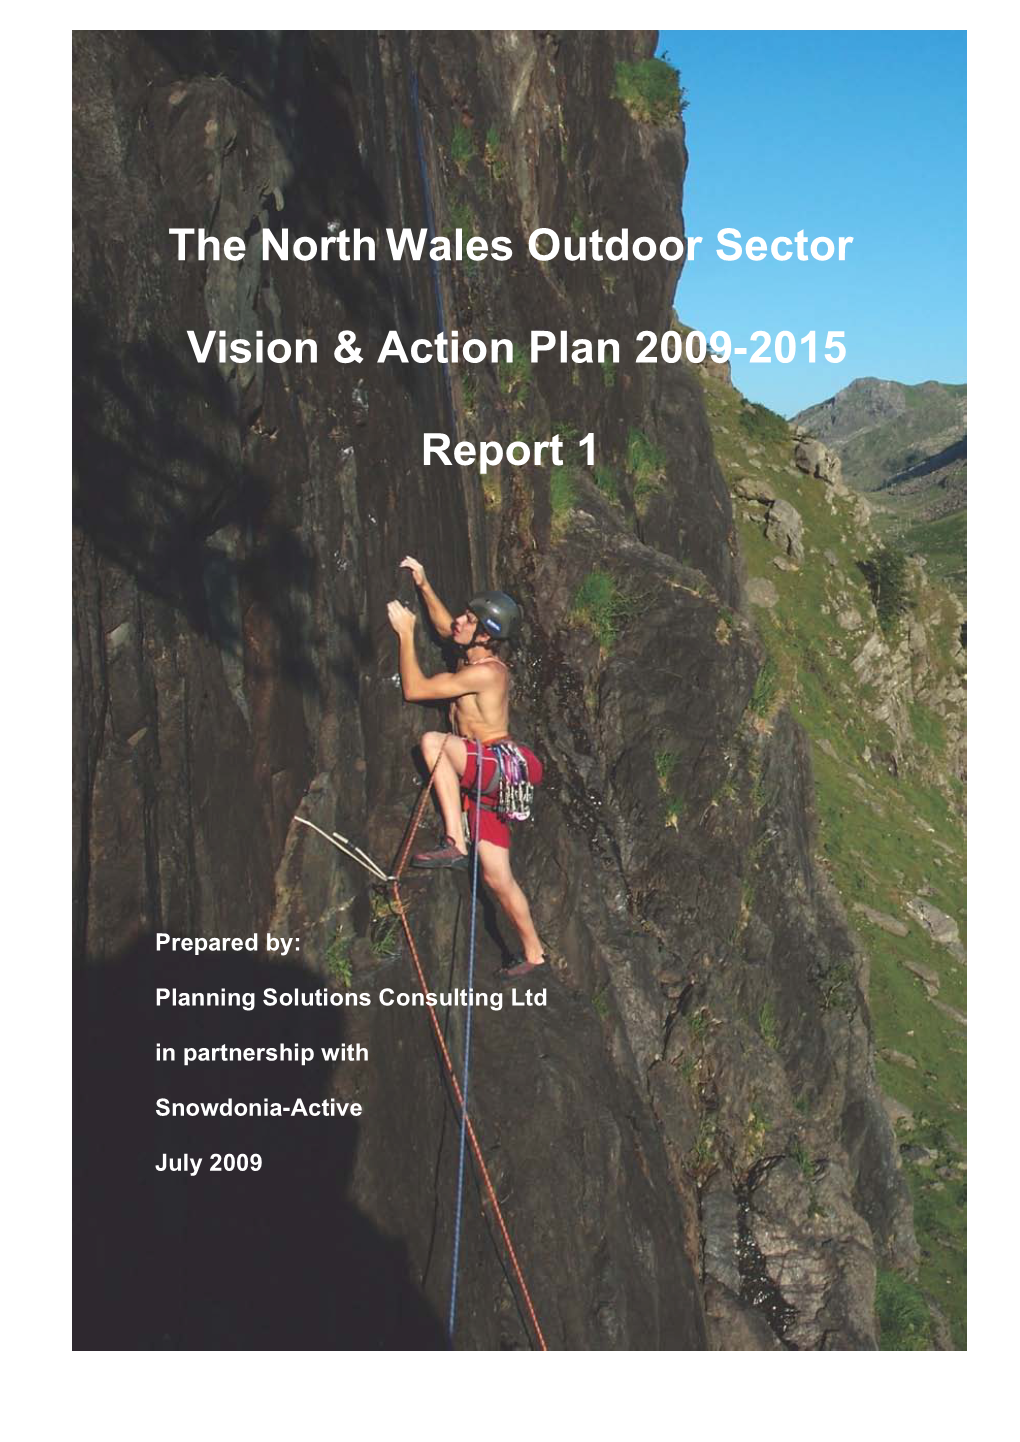 North Wales Outdoor Sector Vision & Action Plan